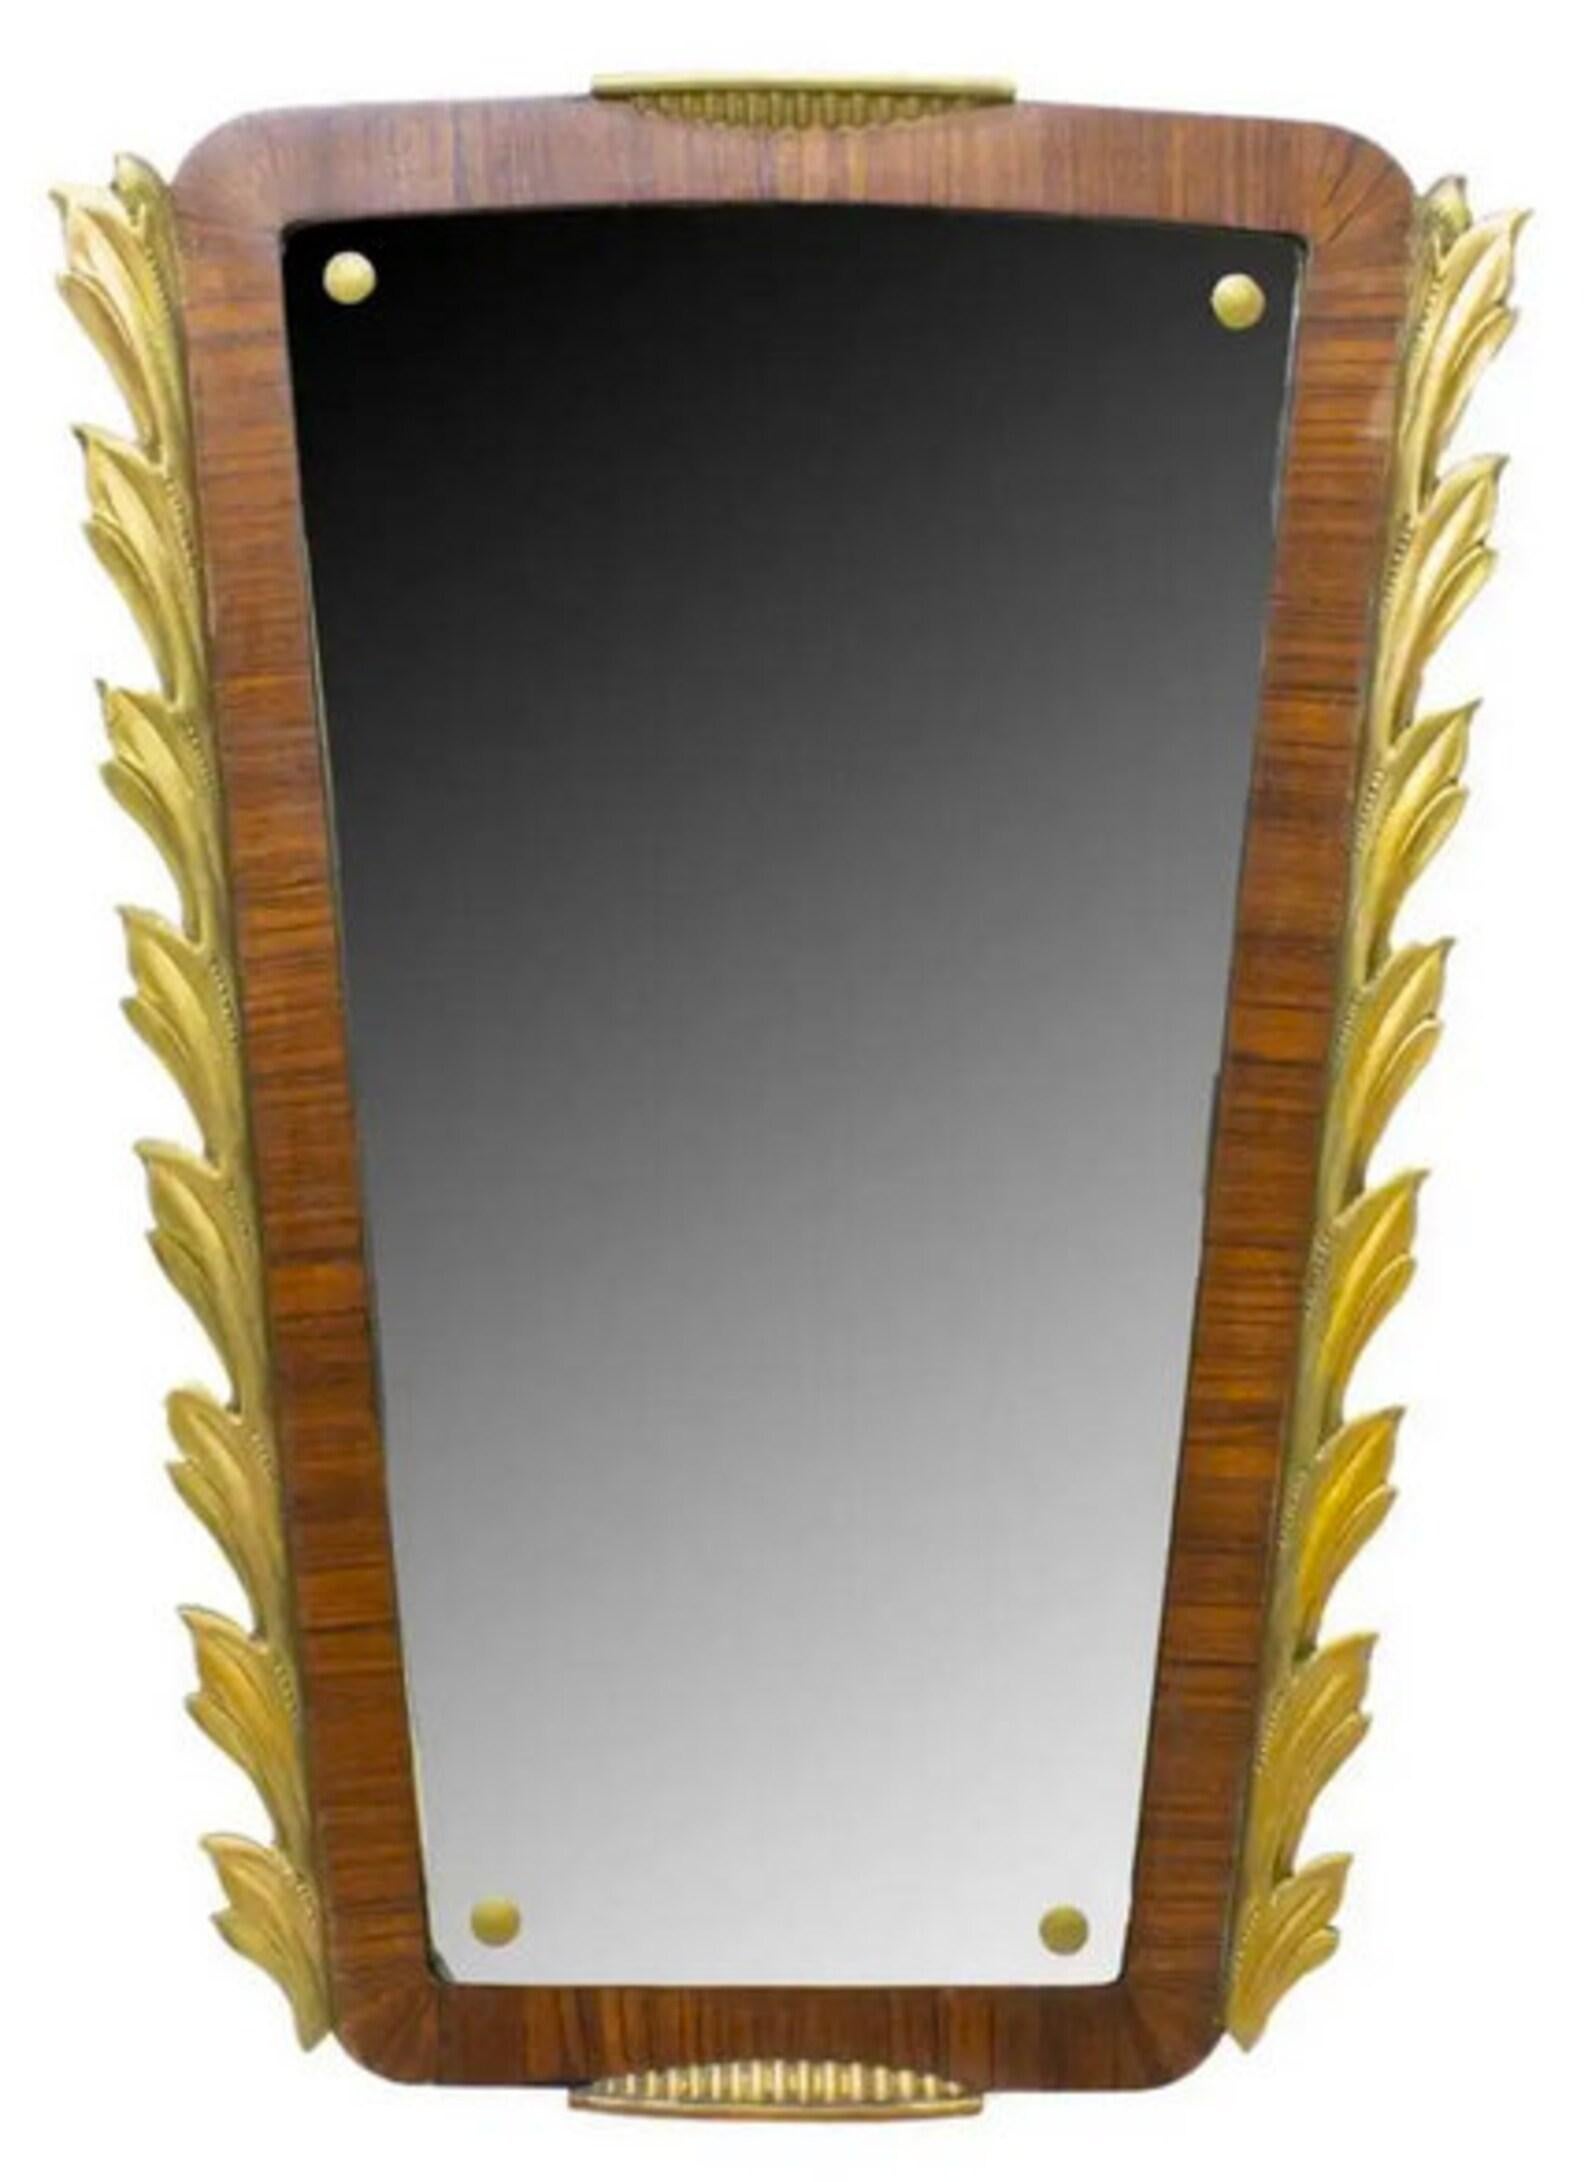 A fabulous period, Art Deco mirror with beautiful patina. Born in France during the early 20th century, having hand carved and gilded foliate trim, exotic figured wood inlaid bezel, holding a thin beveled mirror.

Dimensions (approx):
24.25